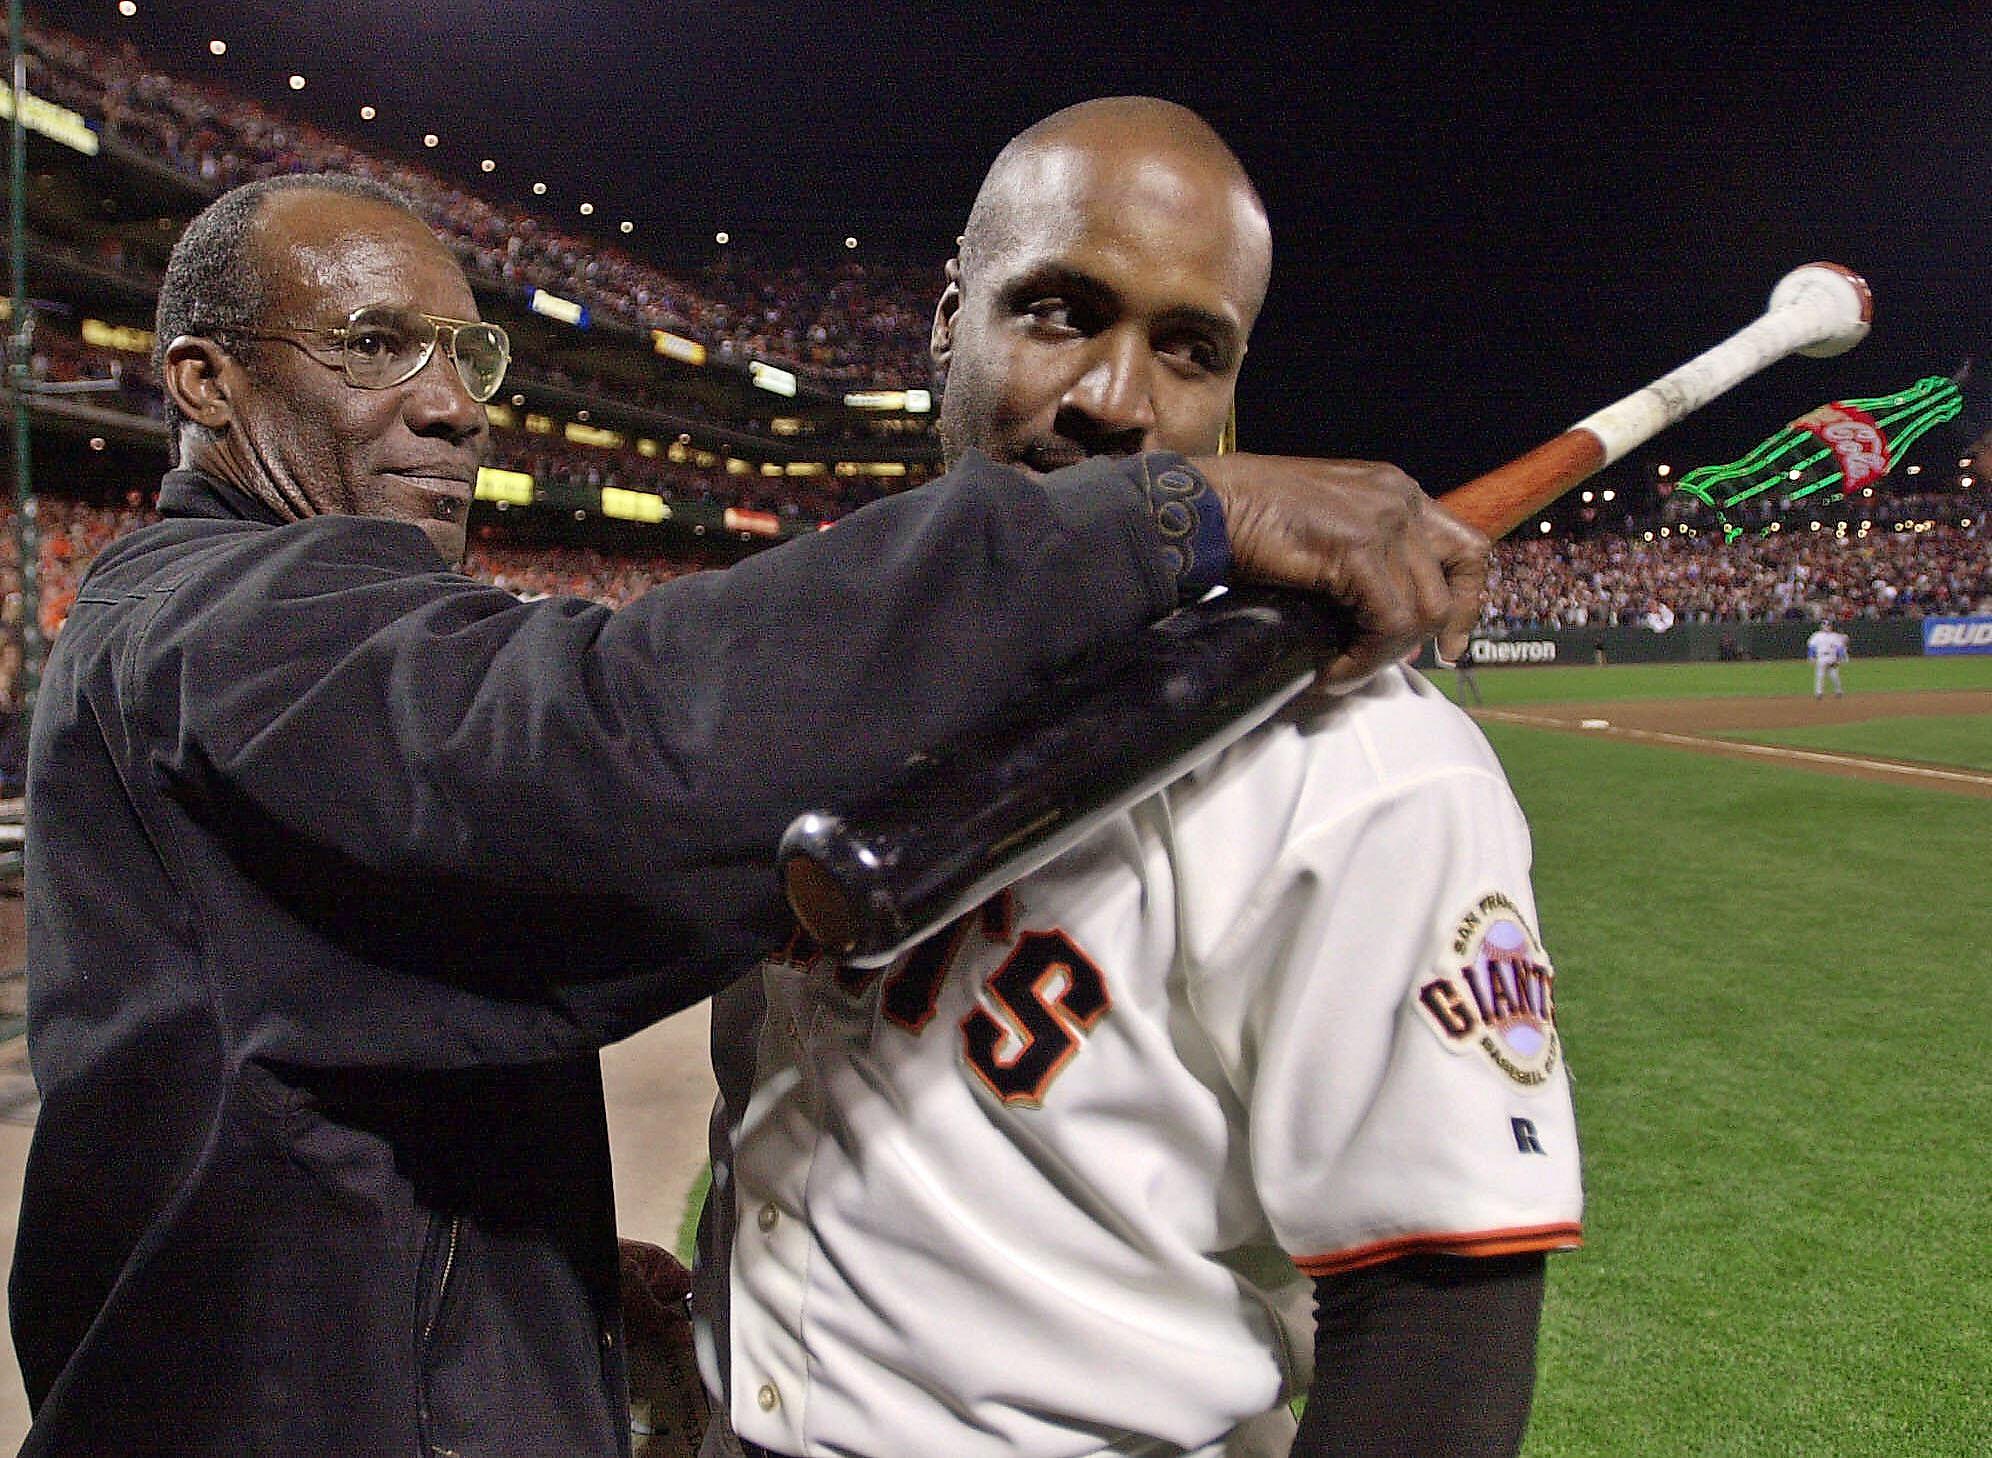 Home run king Barry Bonds has No. 25 retired by Giants